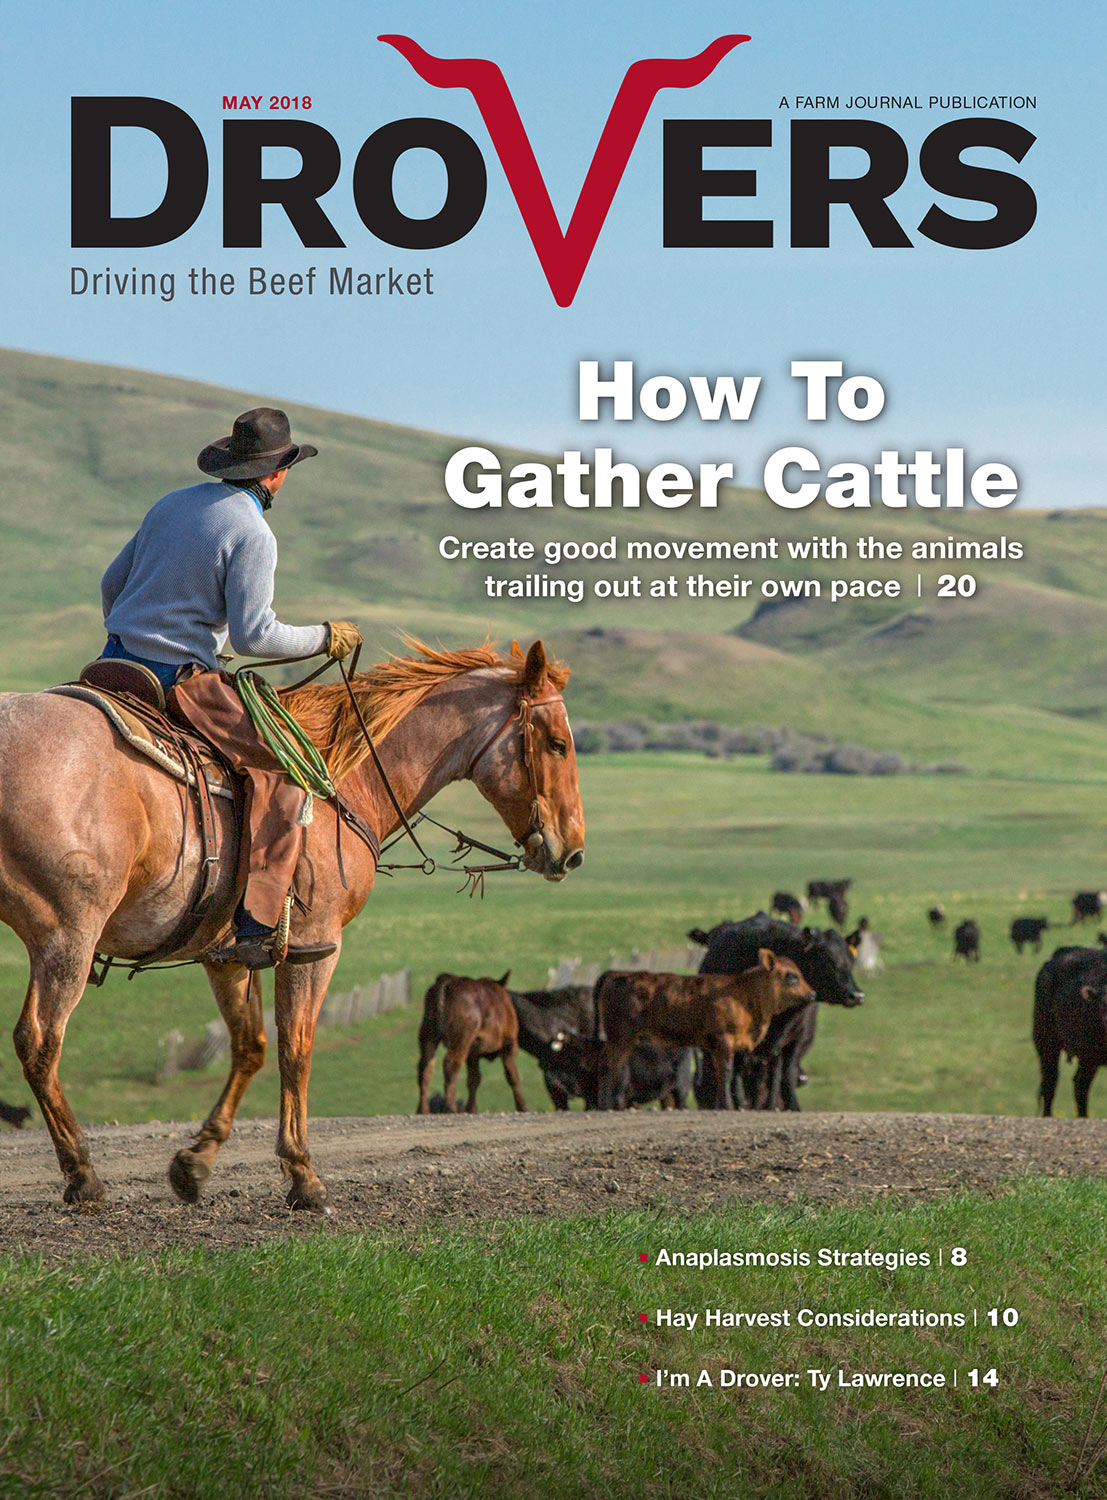 Cowboy Stock Images on Cover of Drovers Cattle Industry Trade Publication